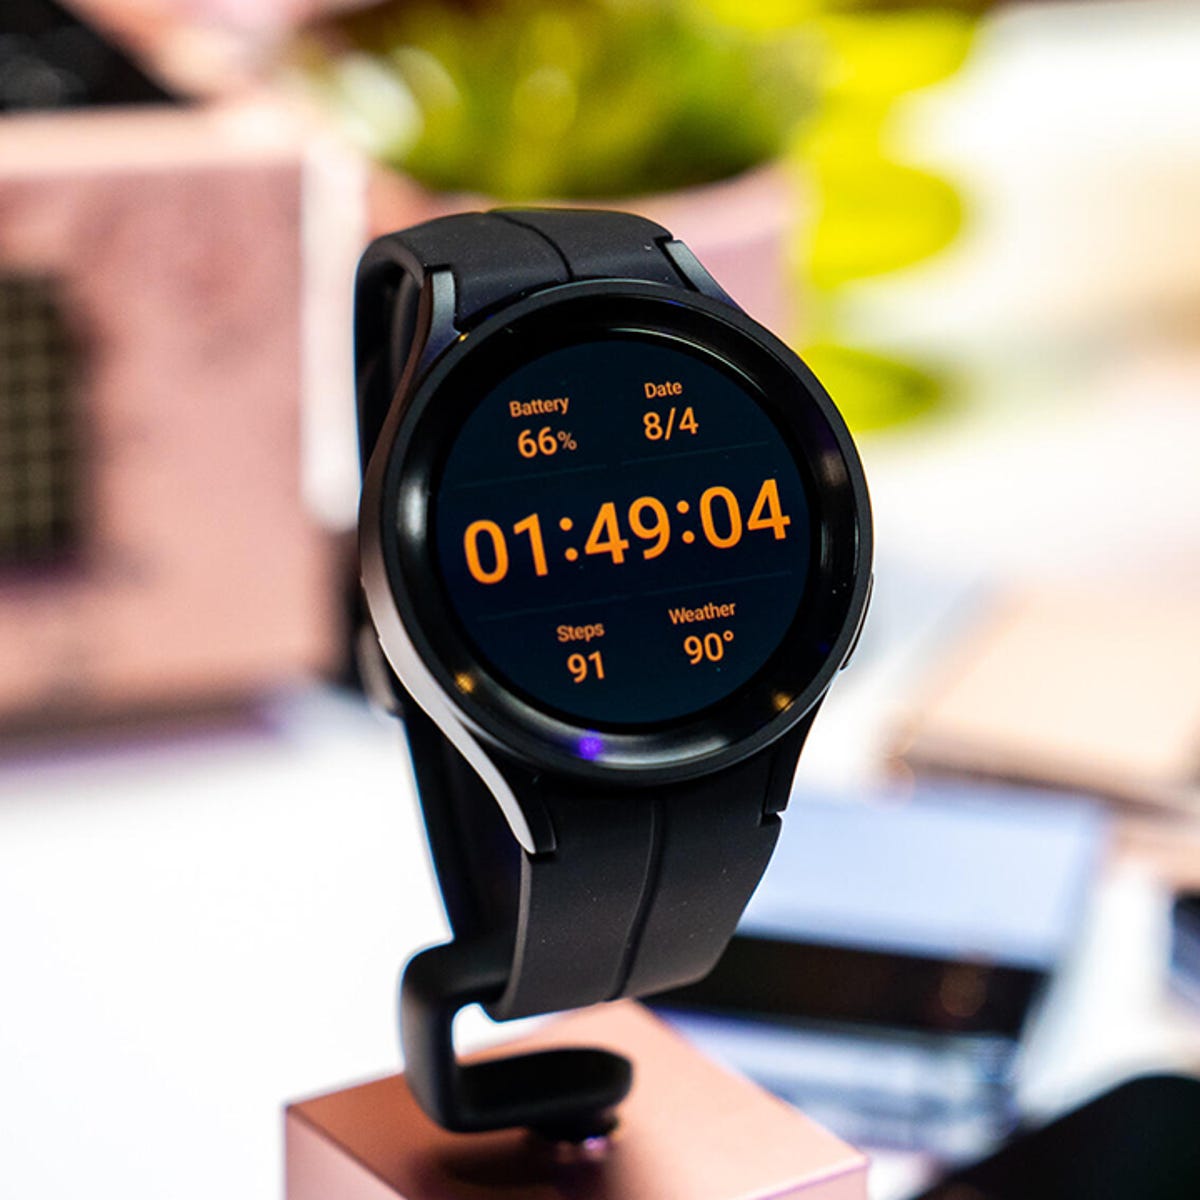 Smartwatch 2022: read our in-depth reviews of the best models